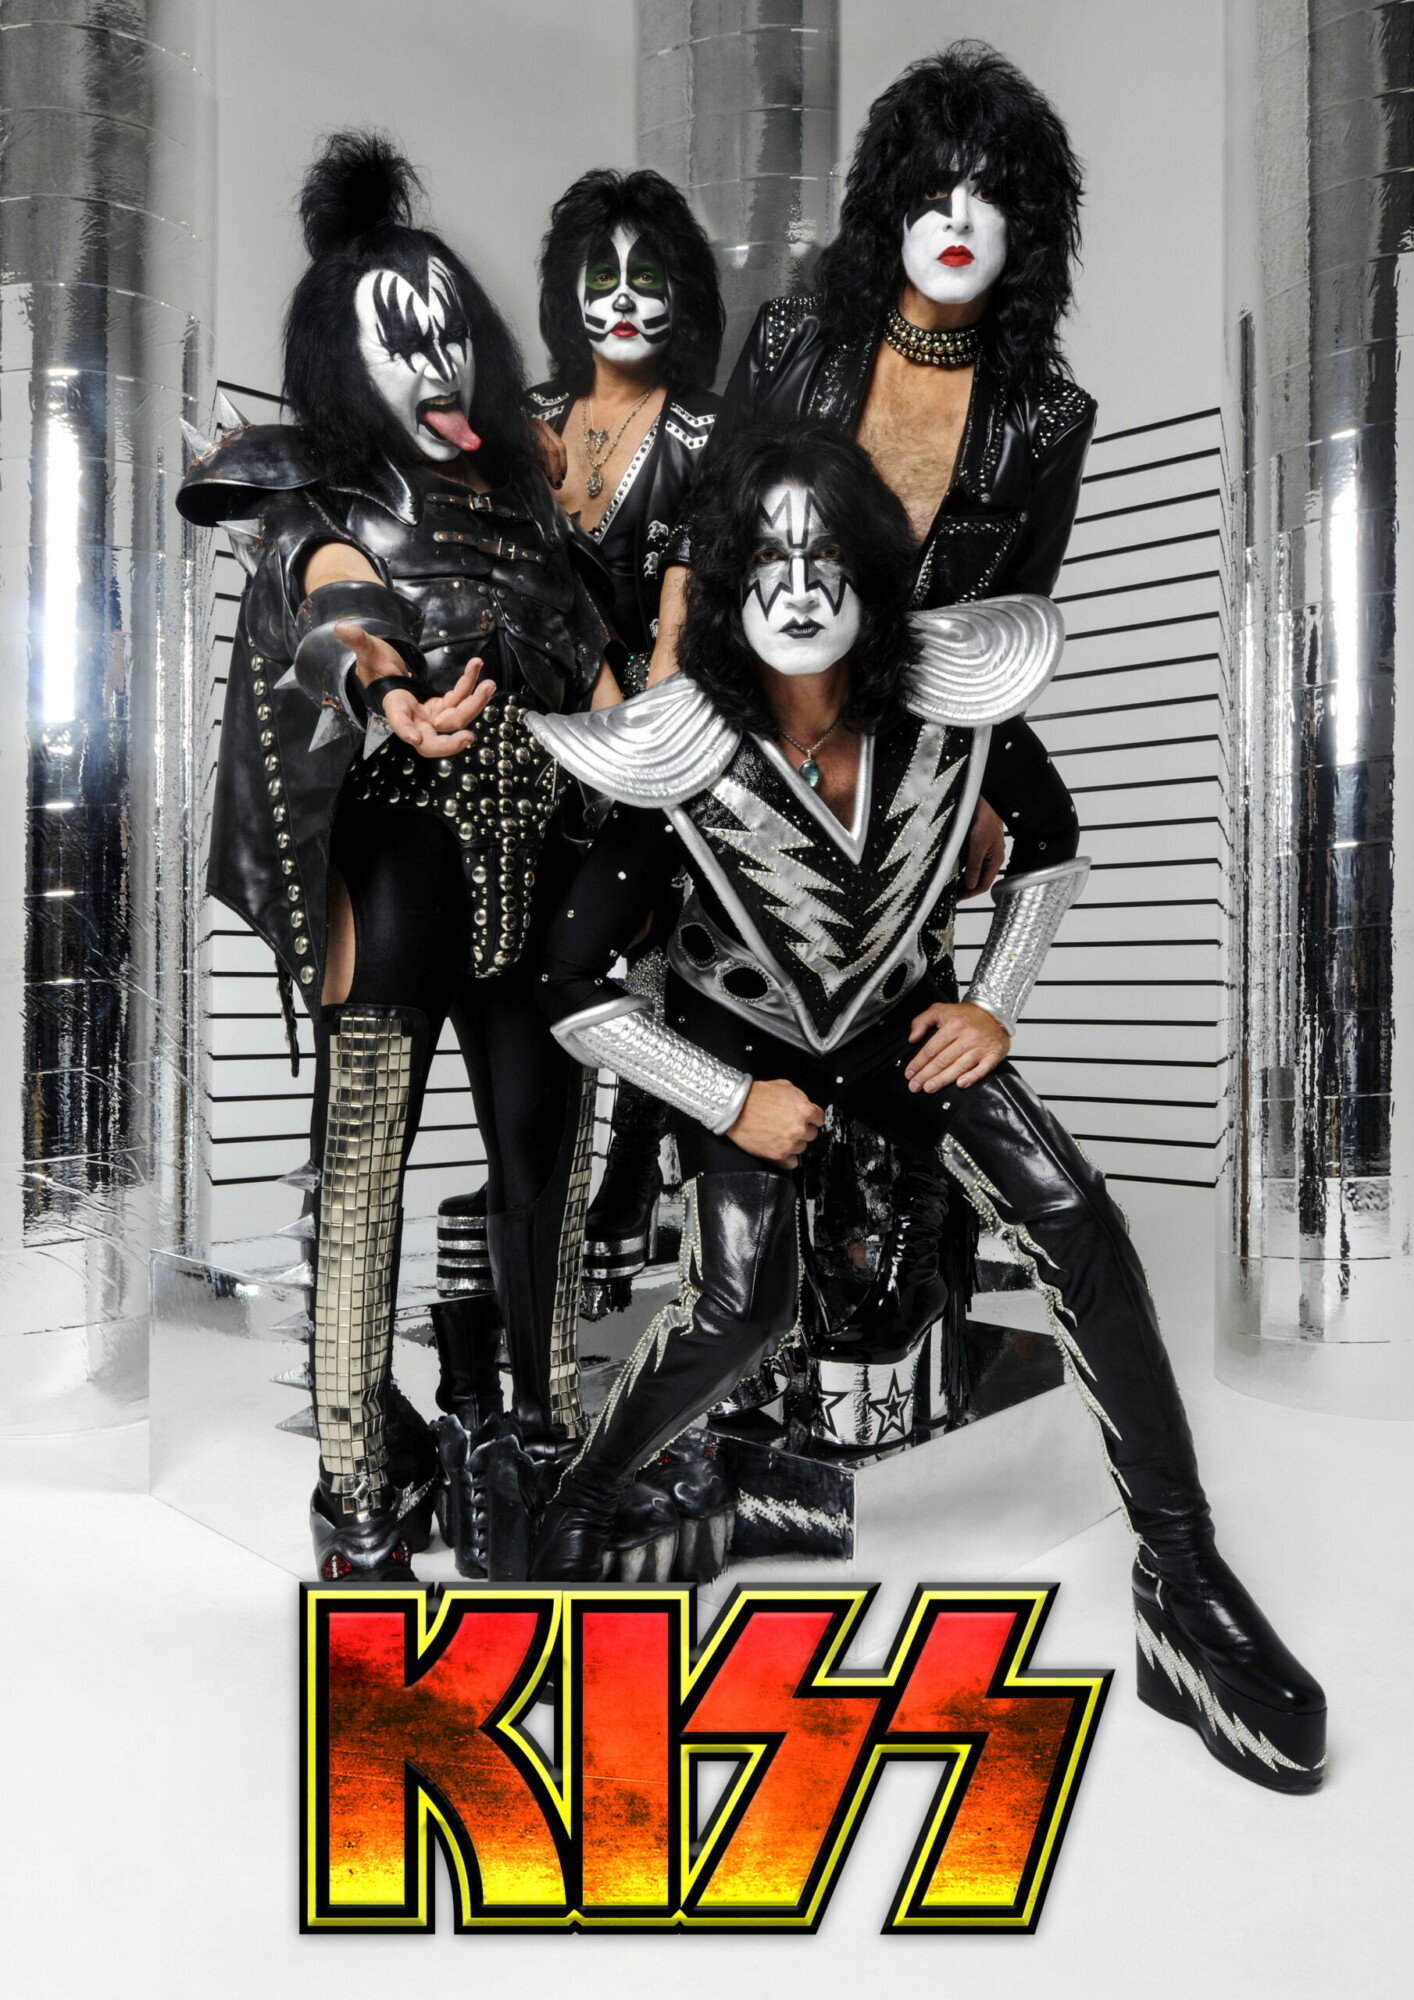 KISS is one of the most successful bands in rock and roll history